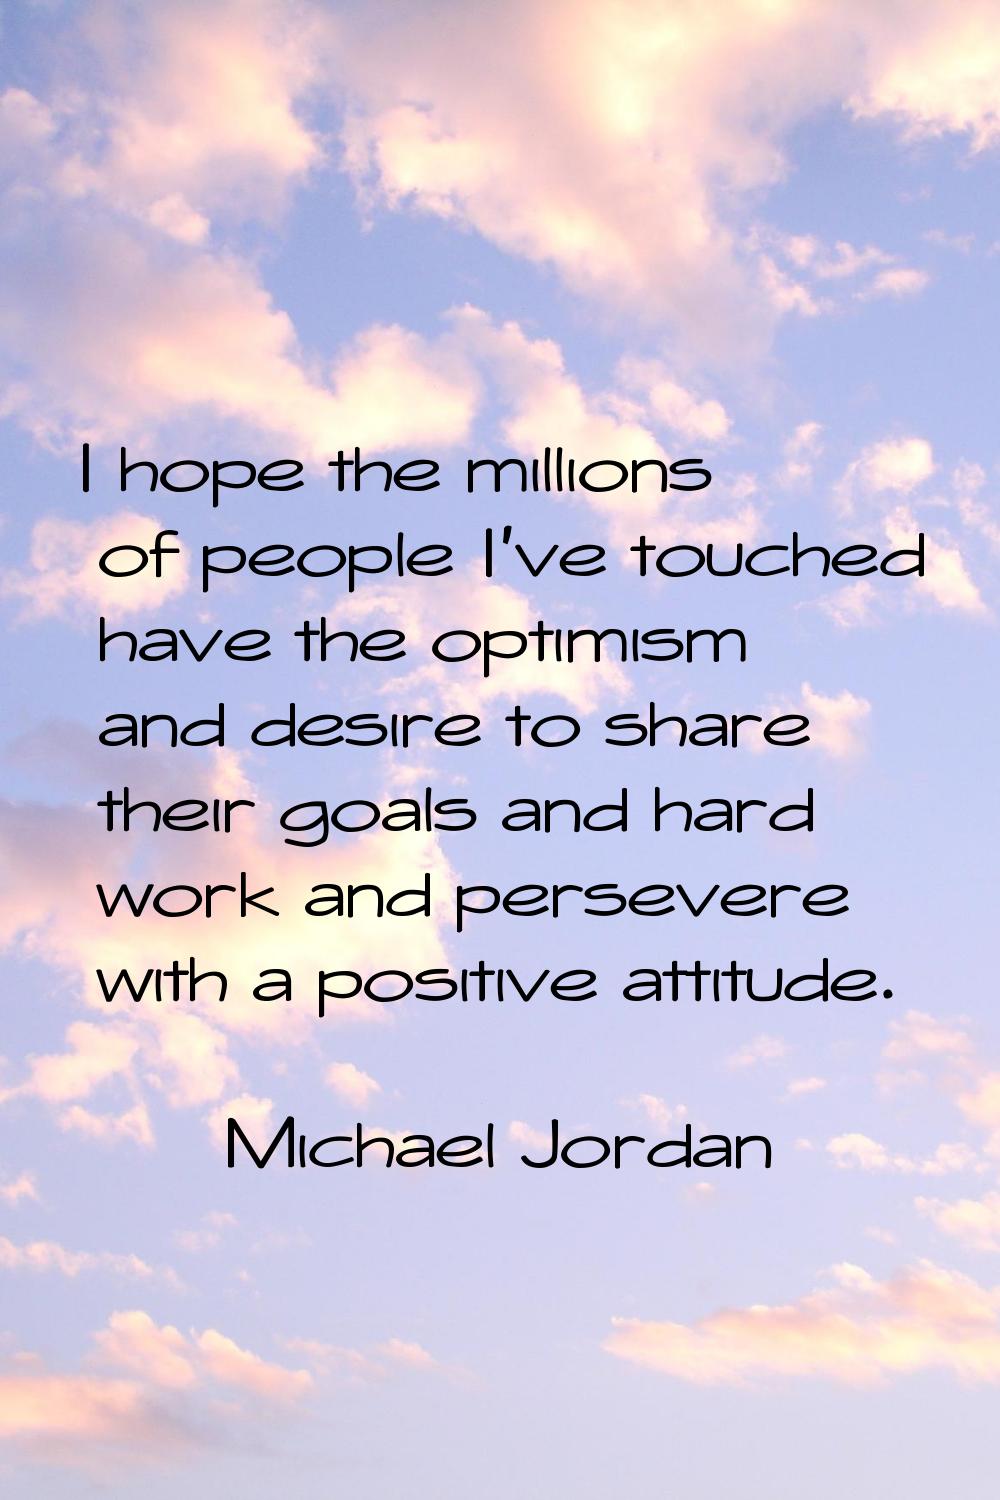 I hope the millions of people I've touched have the optimism and desire to share their goals and ha